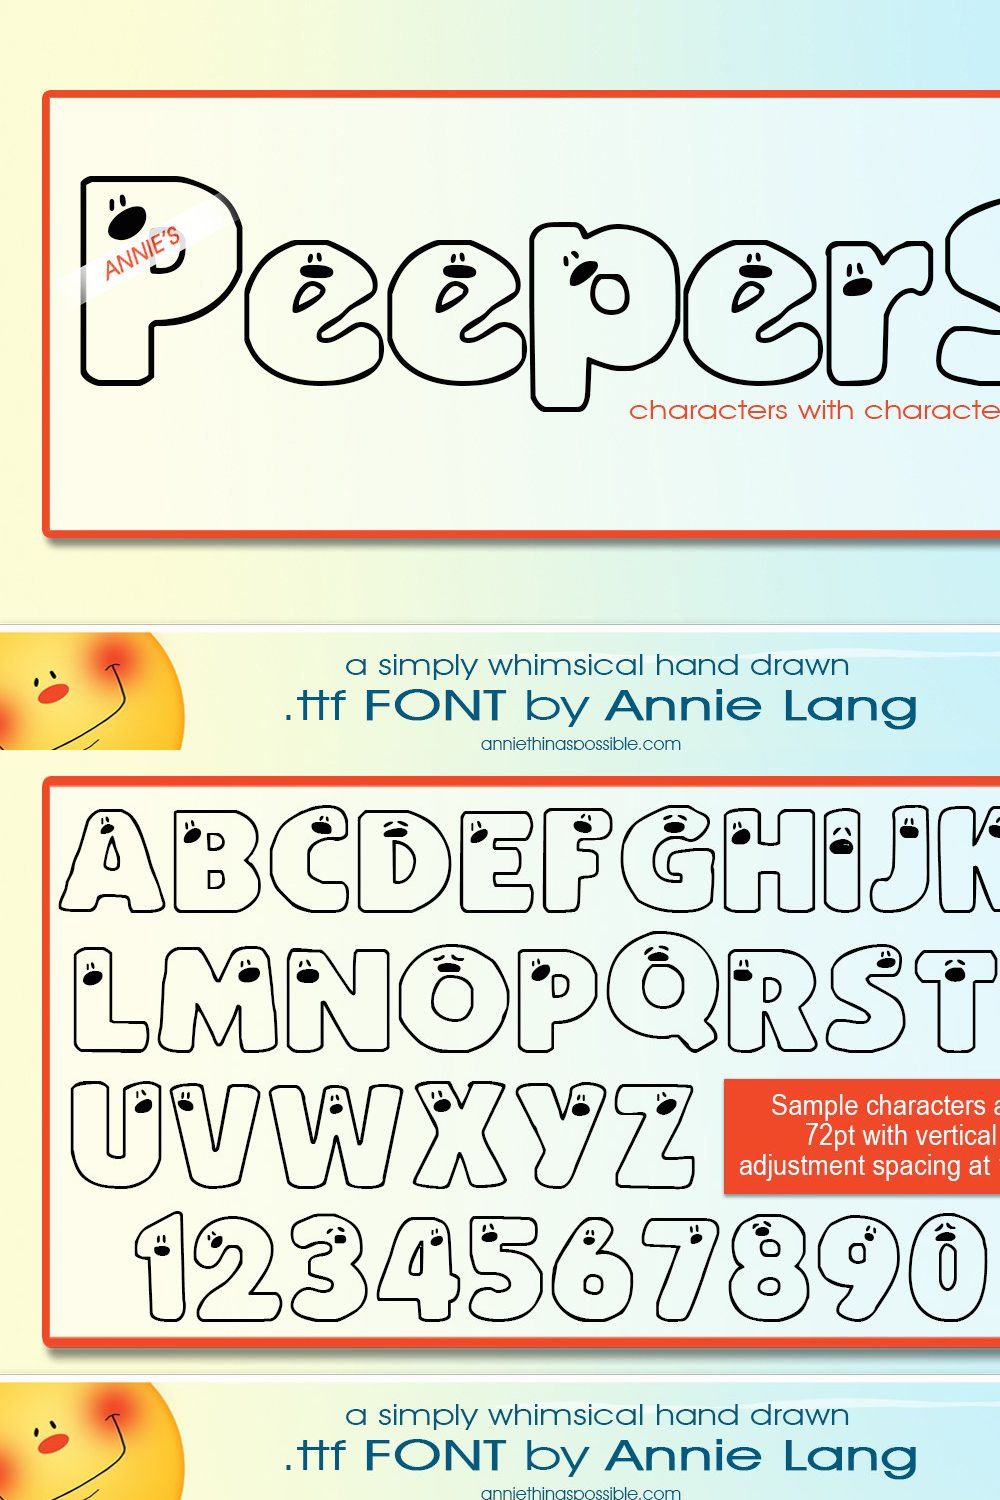 Annie's Peepers Font pinterest preview image.